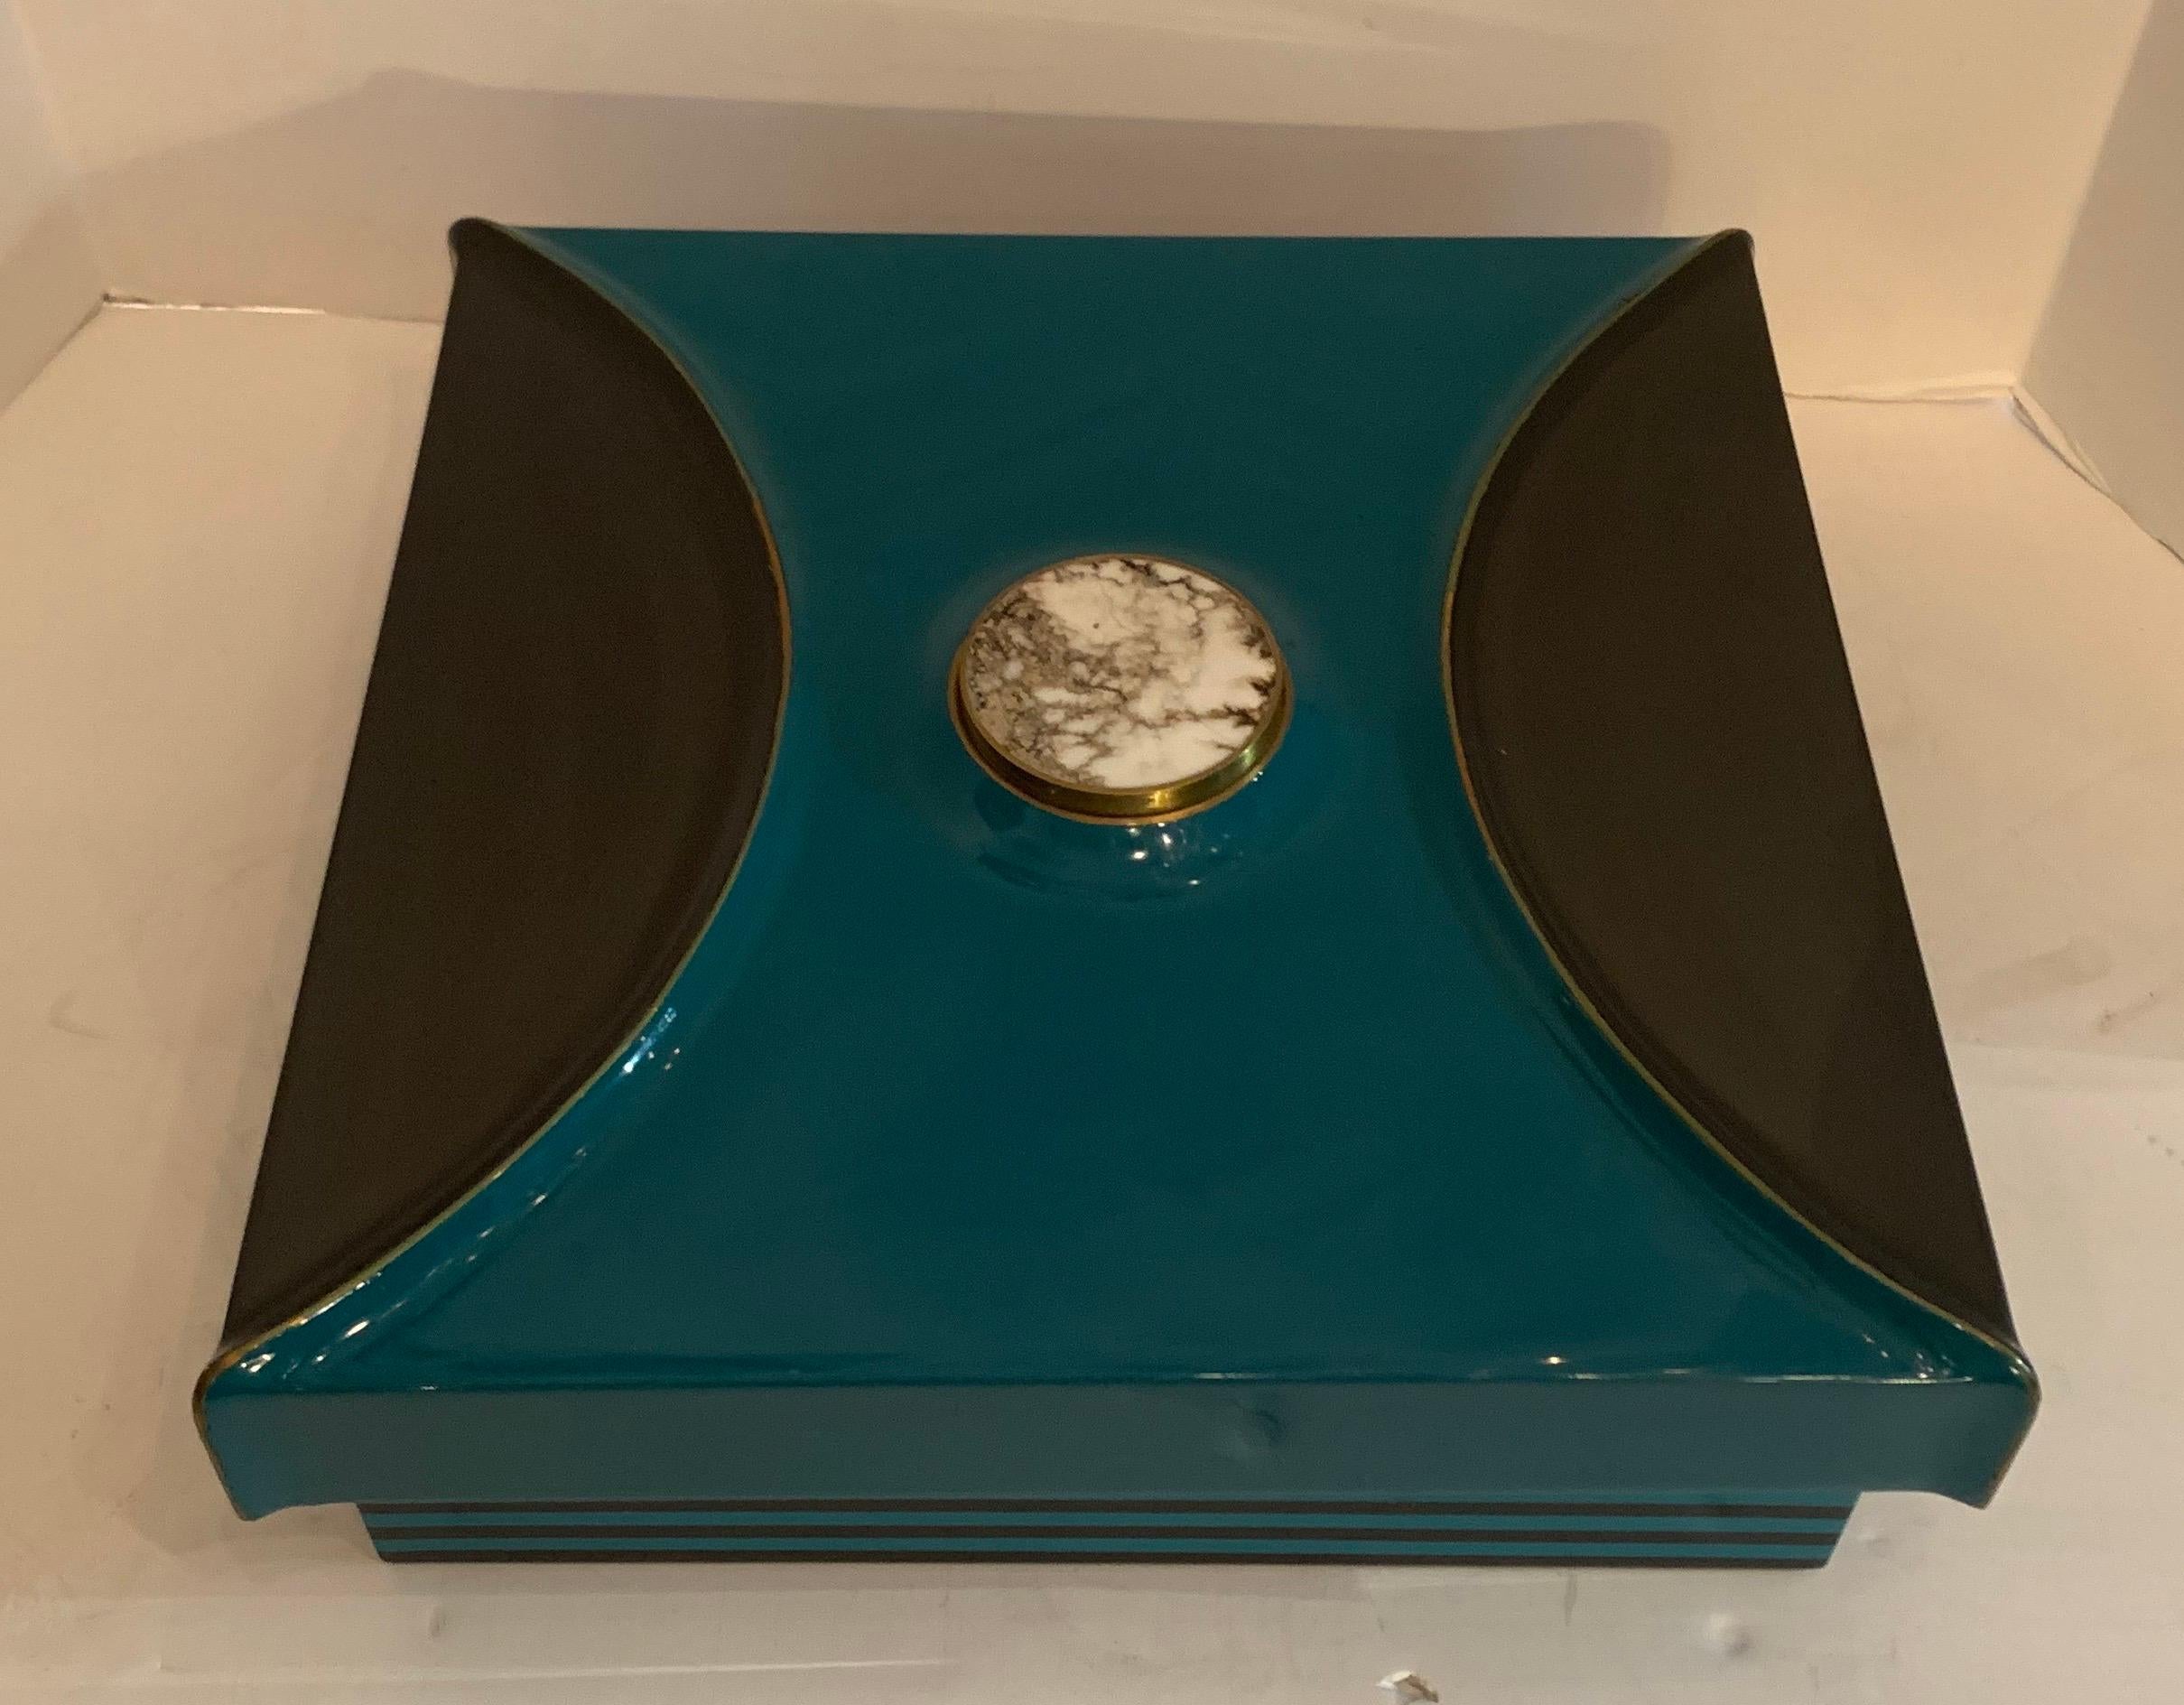 A wonderful midcentury Lorin marsh turquoise and grey lacquered with brass and Howlite semi precious stone inset box, the interior with brown leather lining.